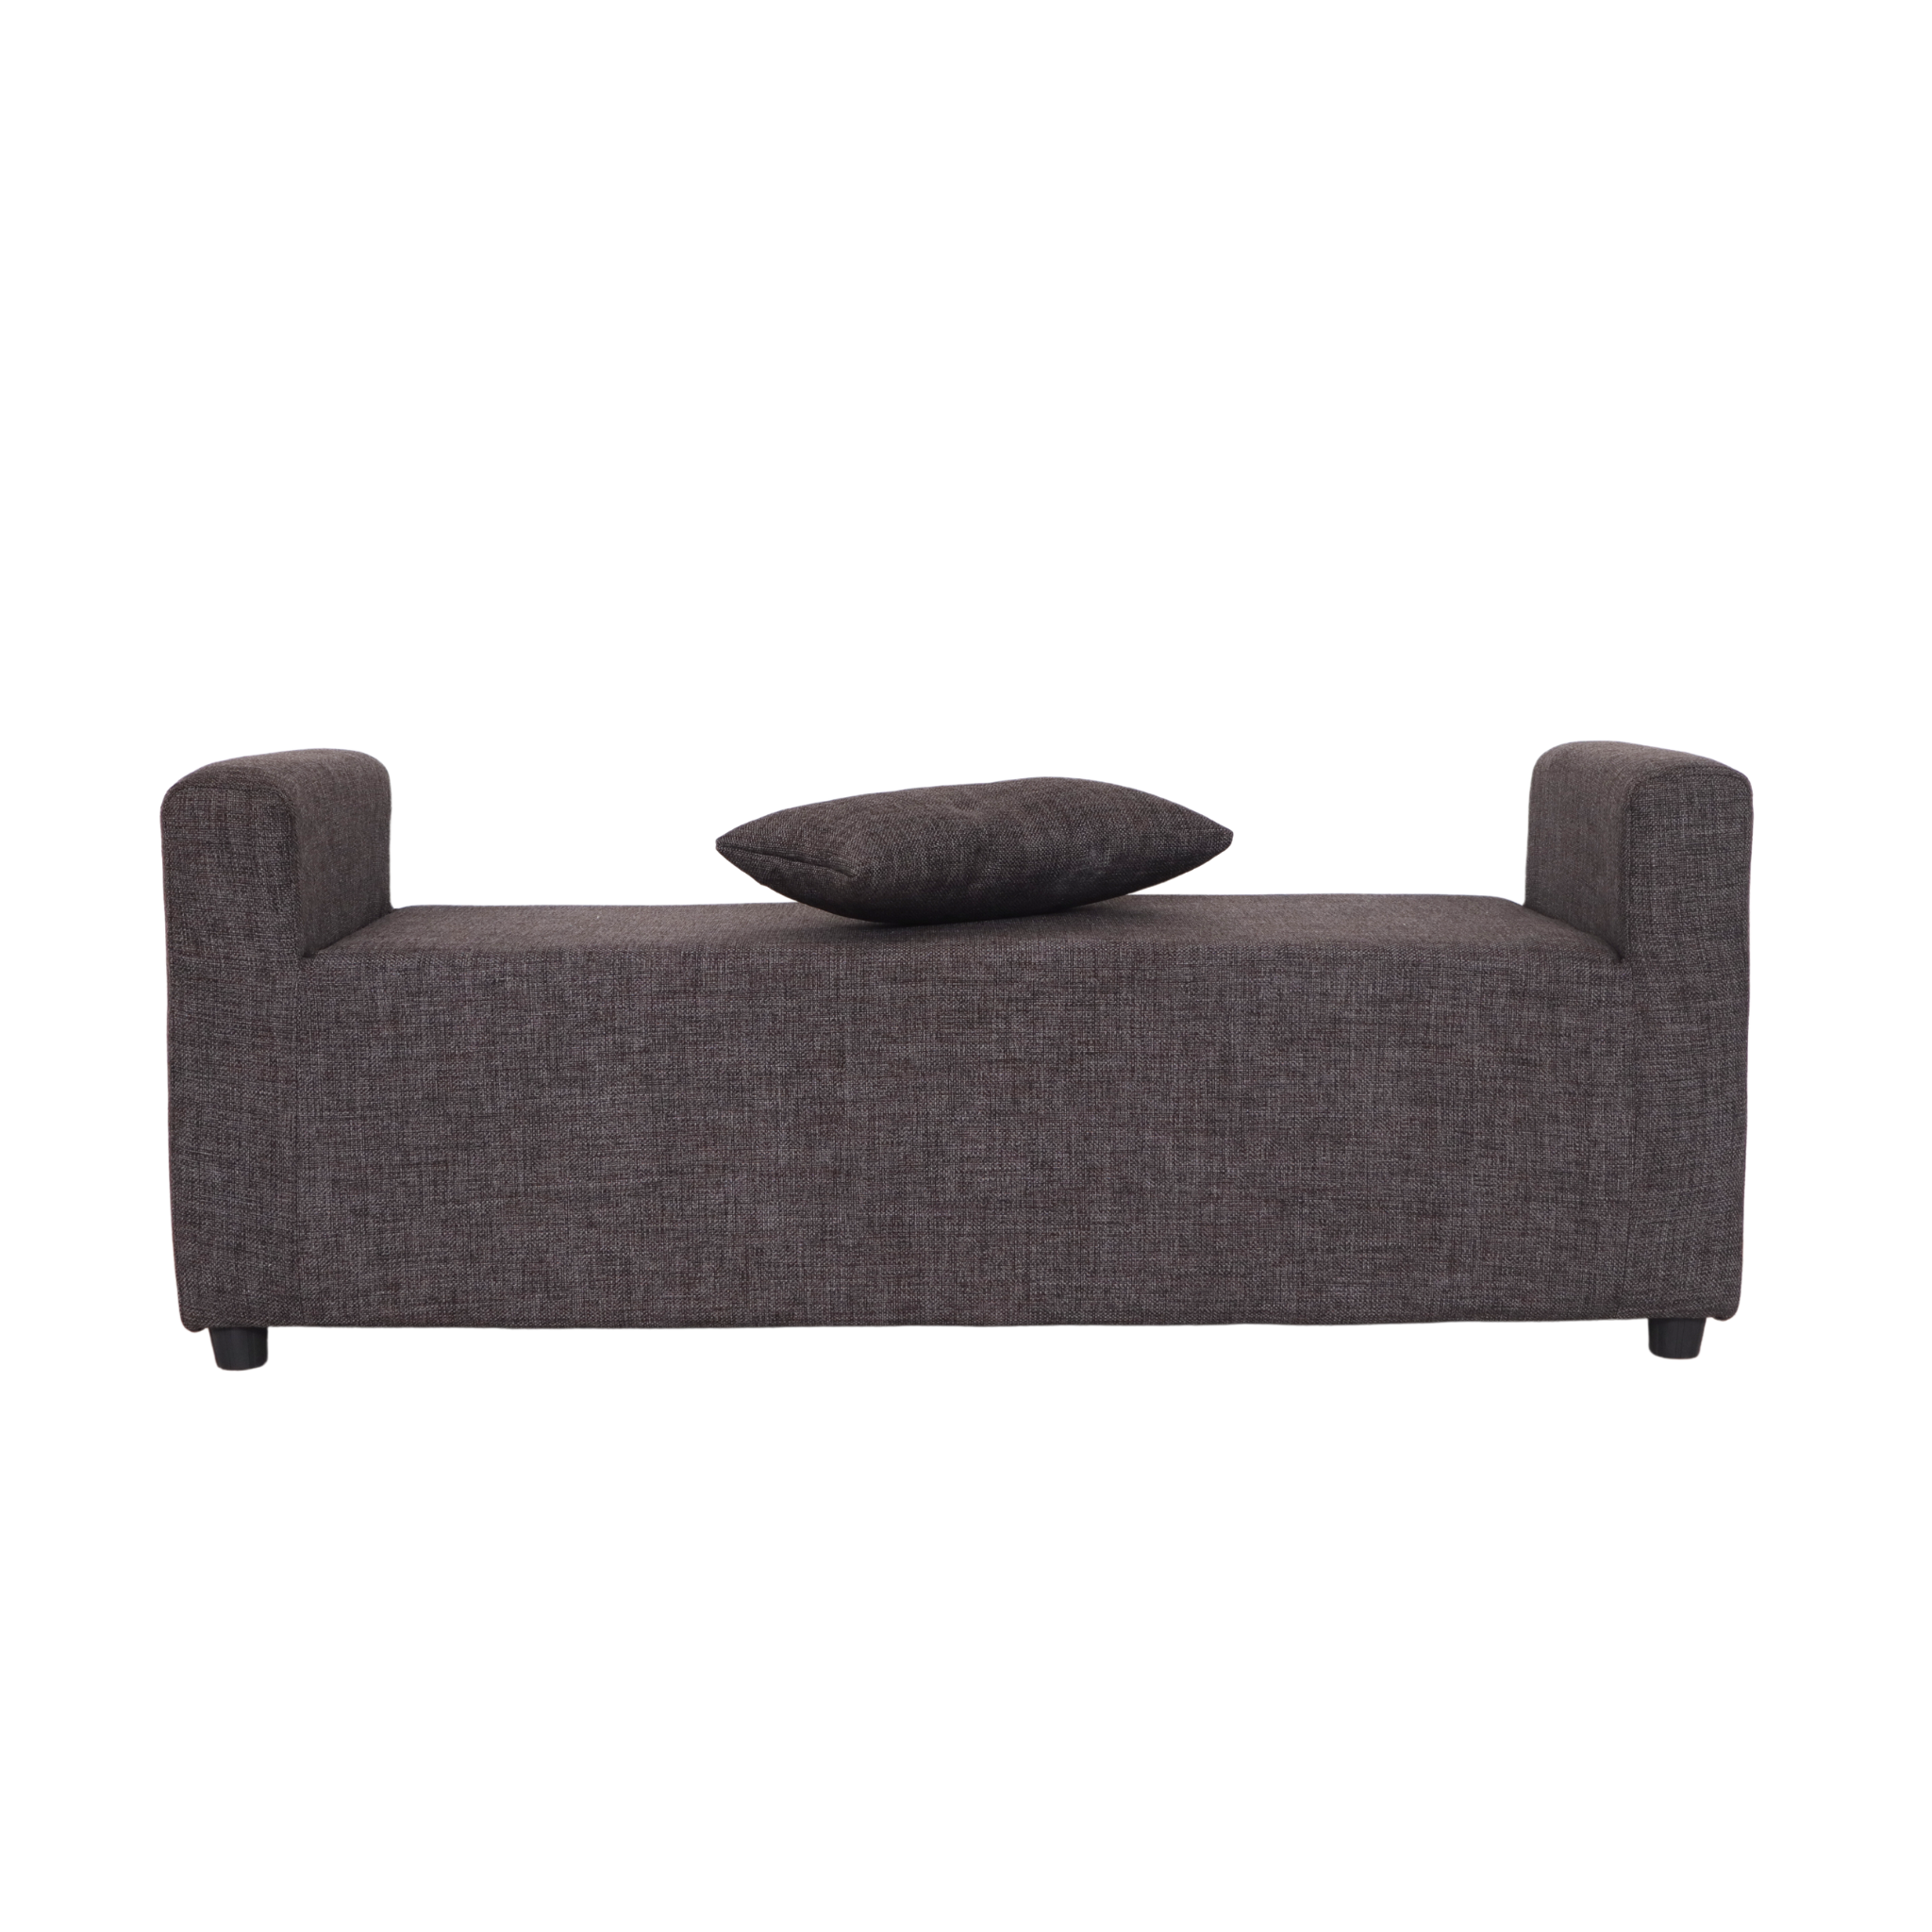 FALCON 2 Seater Bench (Leather Sofa) AF Home